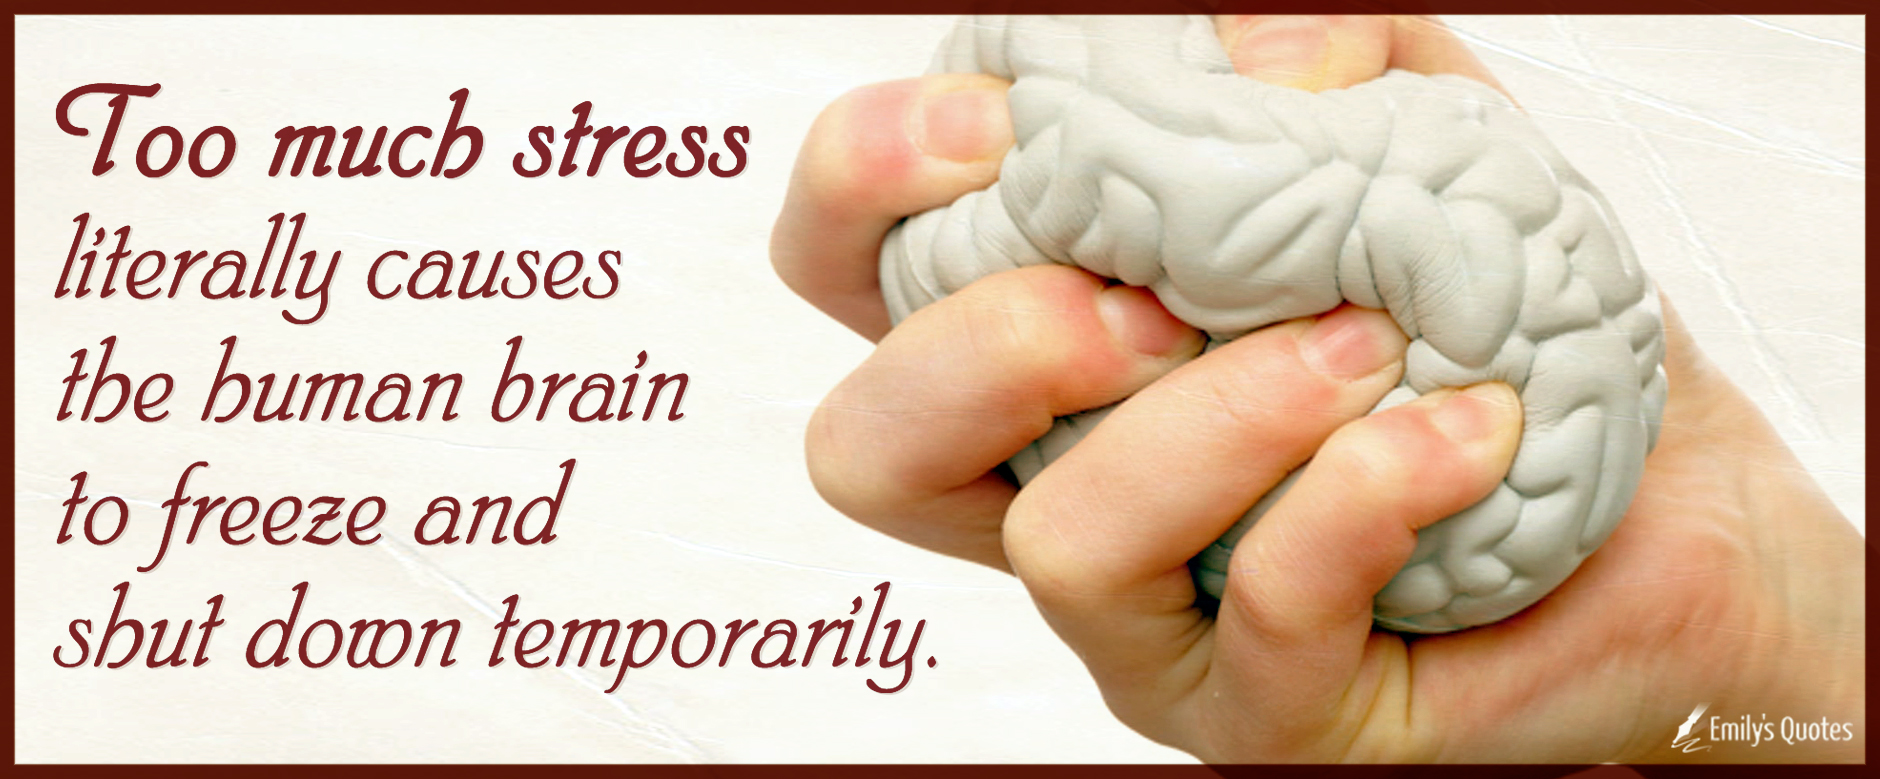 Too much stress literally causes the human brain to freeze